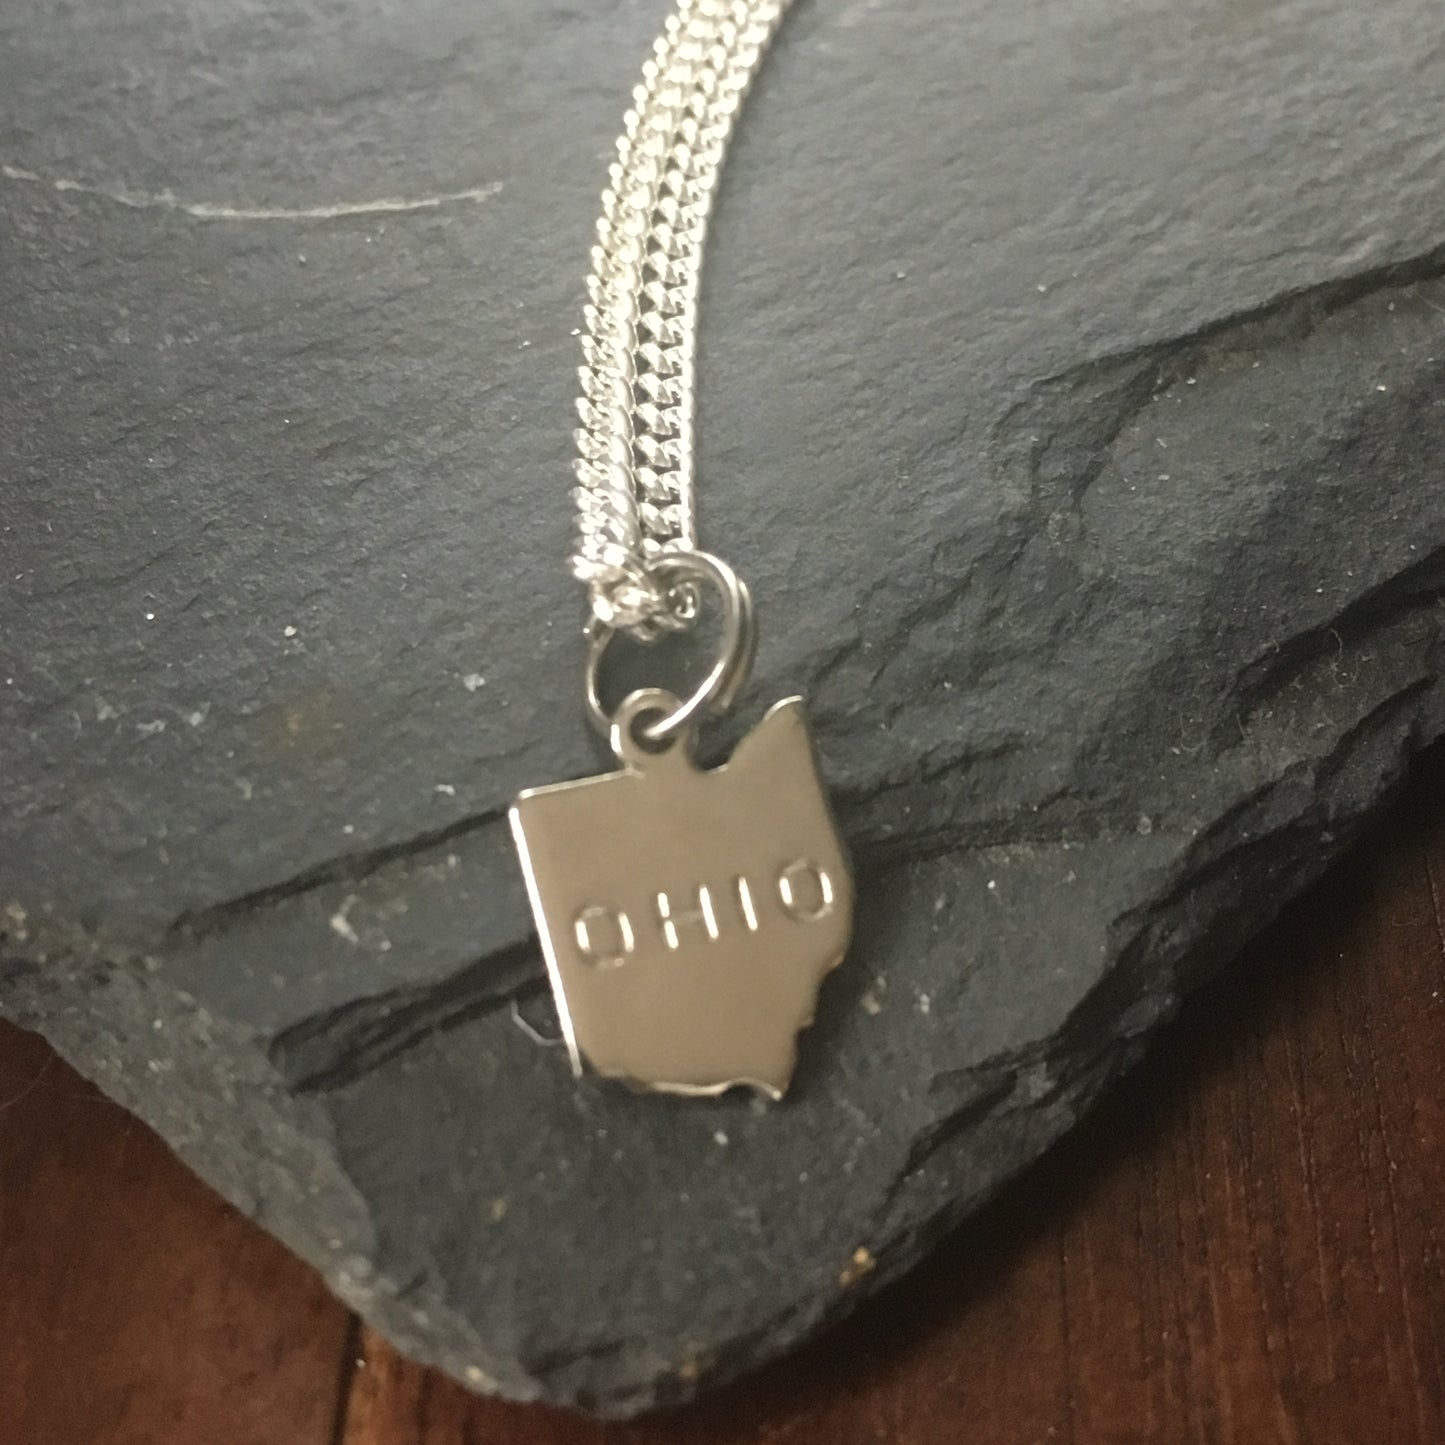 Silver Ohio stamped charm necklace